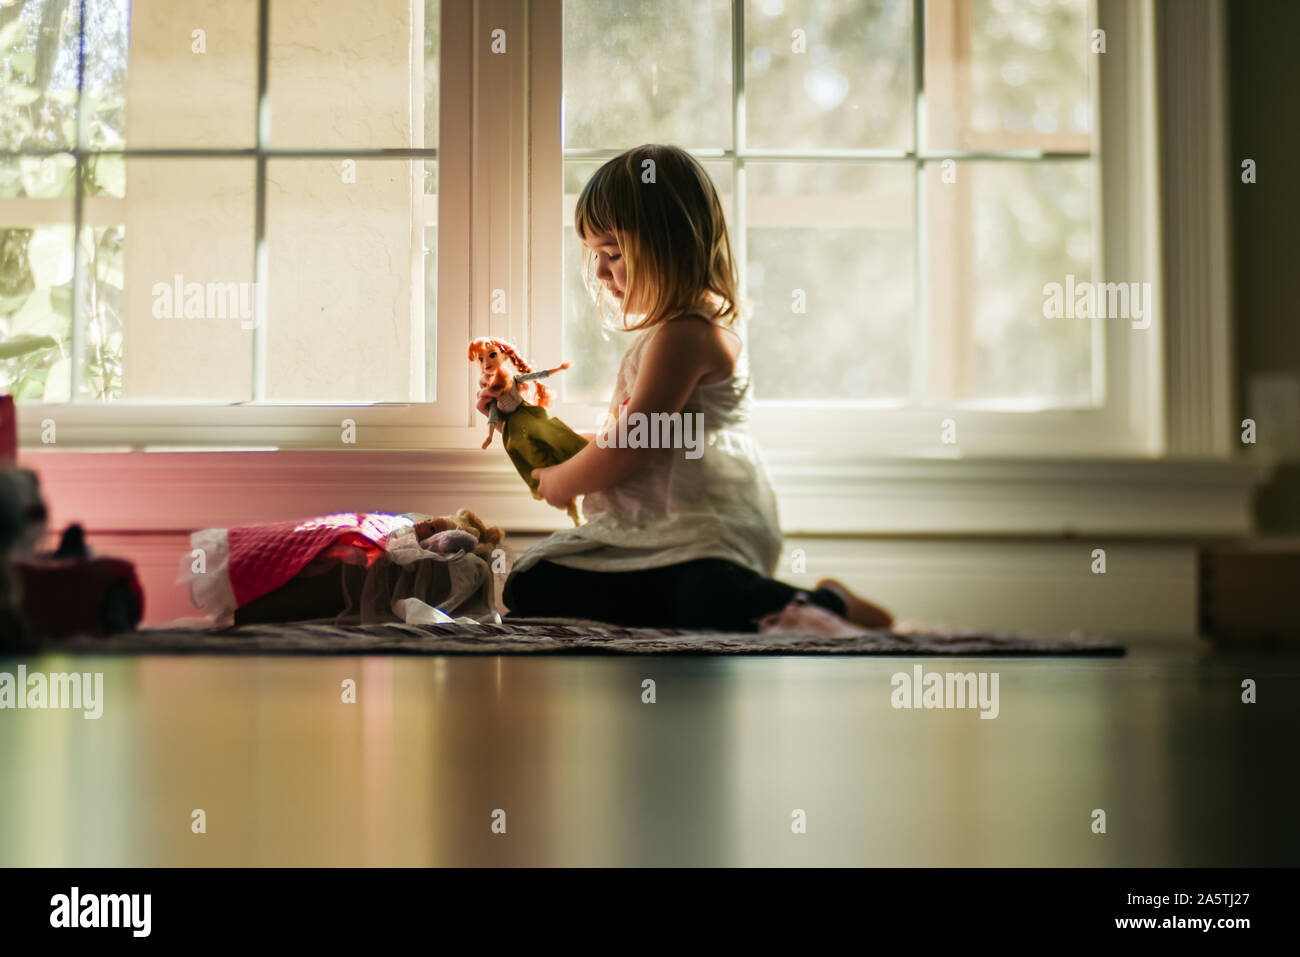 young girl playing dolls by window Stock Photo